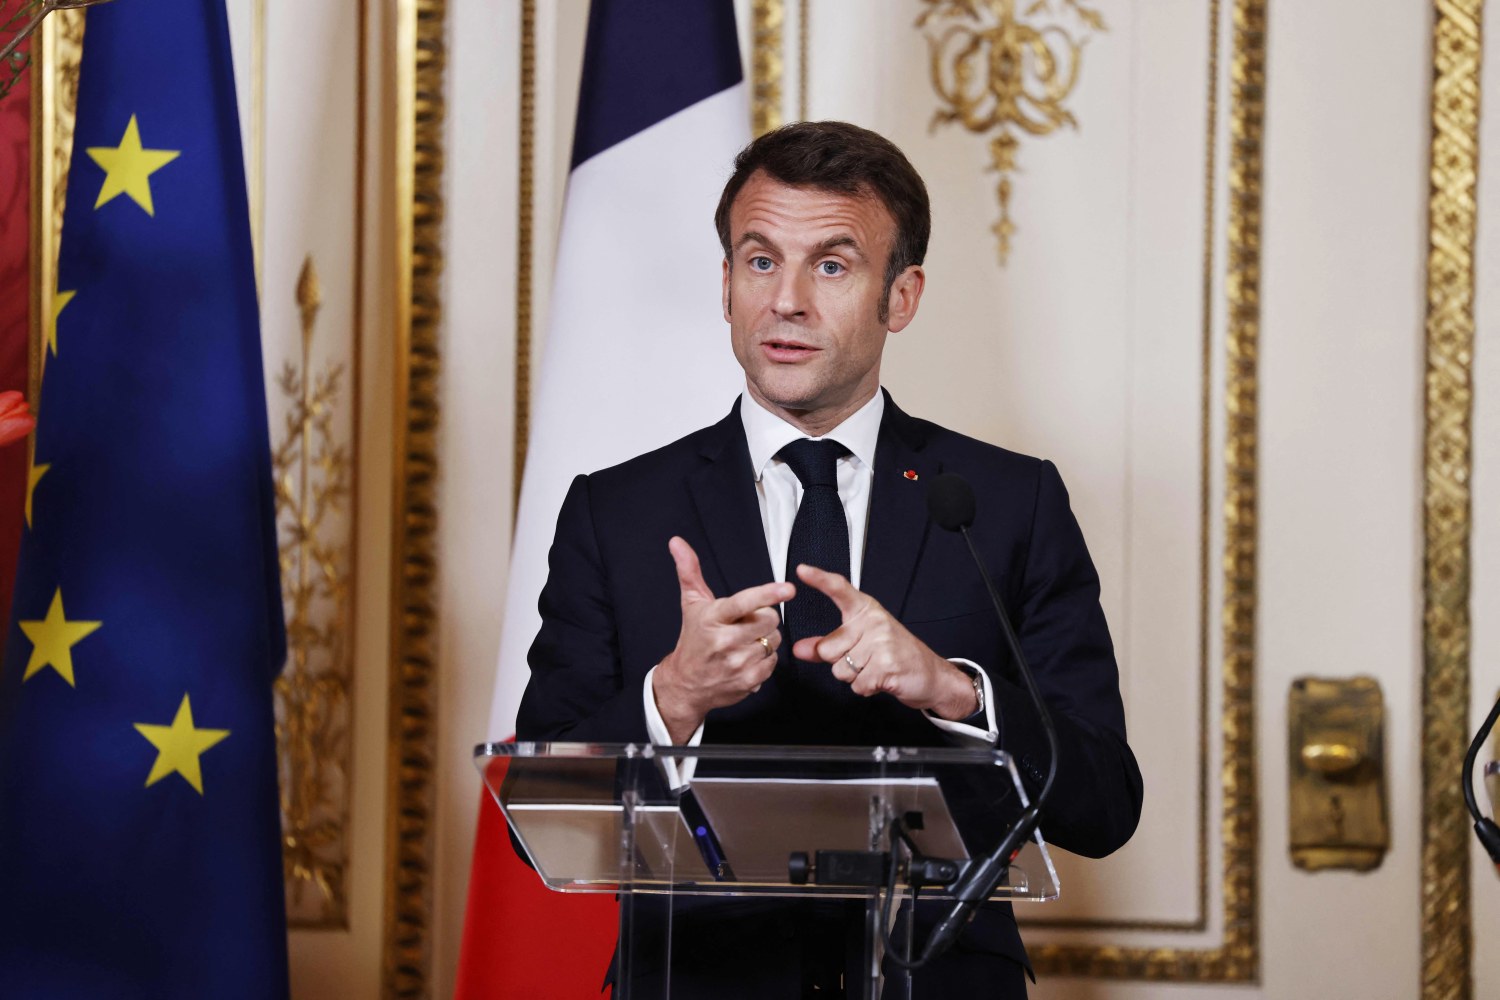 Europe presses tough Taiwan stance after backlash against Macron comments